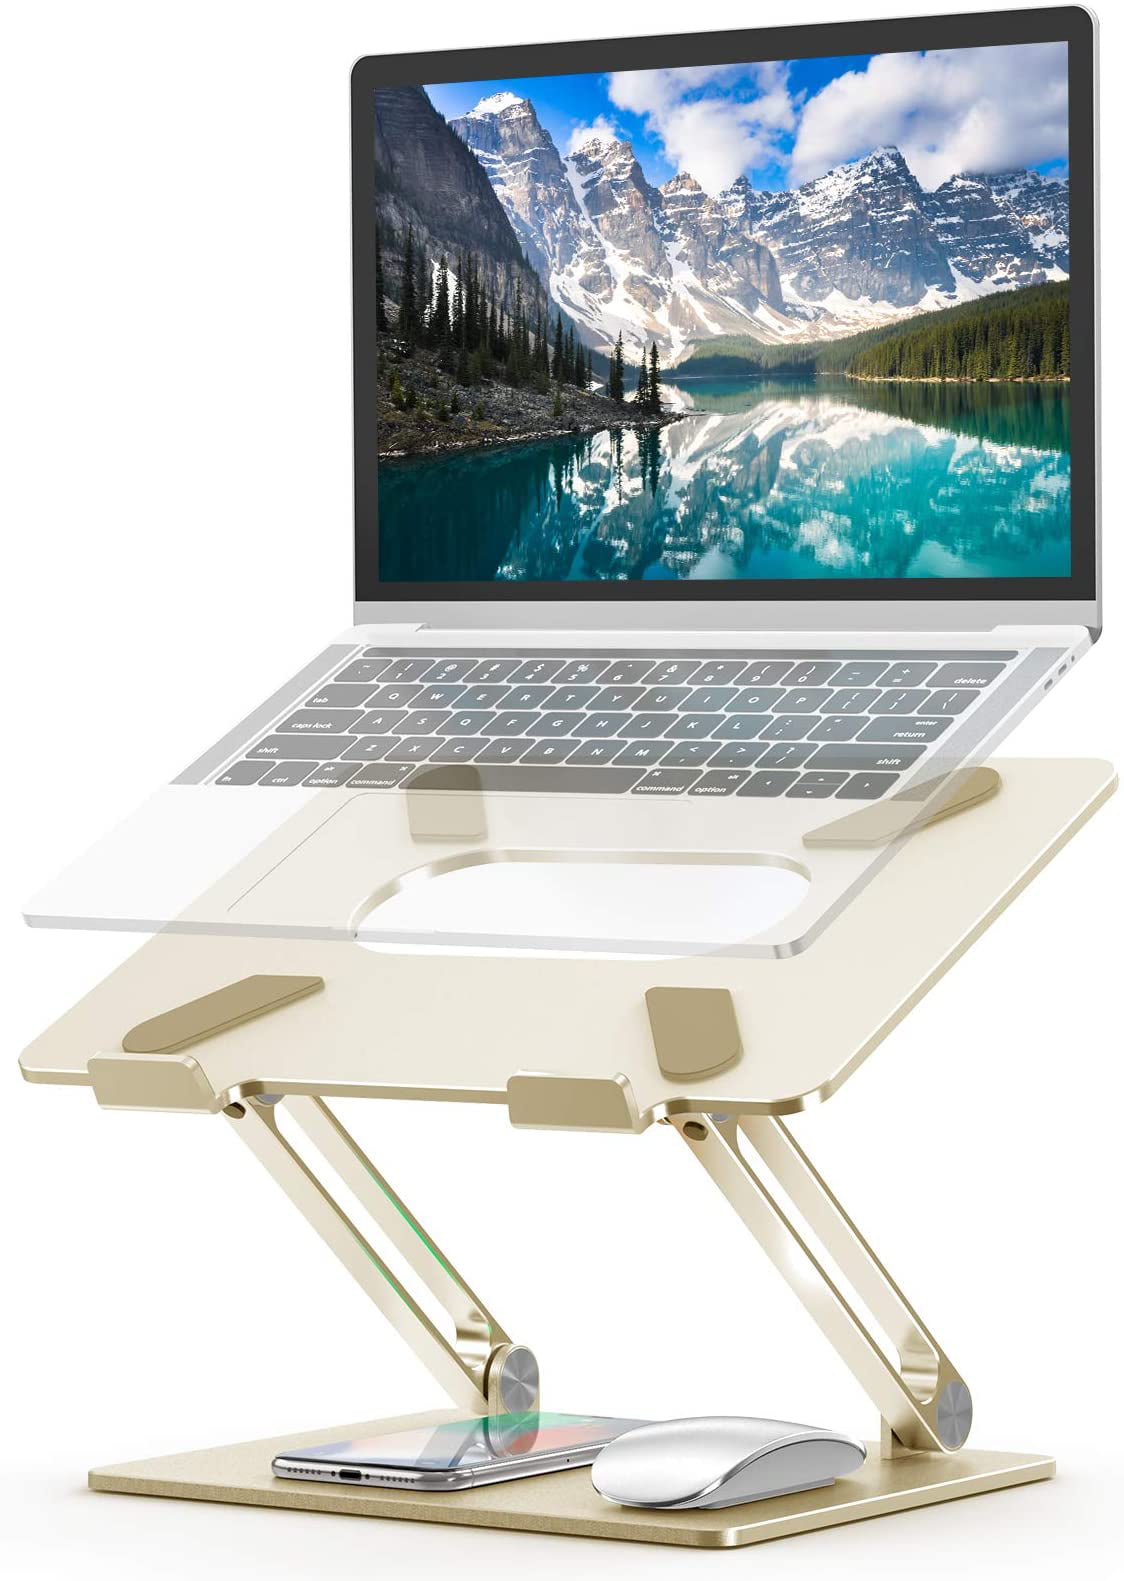 Laptop Stand Ergonomic Adjustable Notebook Stand Aluminum Portable Computer Riser with Heat-Vent Foldable Desktop Laptop Holder Compatible with MacBook Air Pro All 10 to 17 Inch Laptops